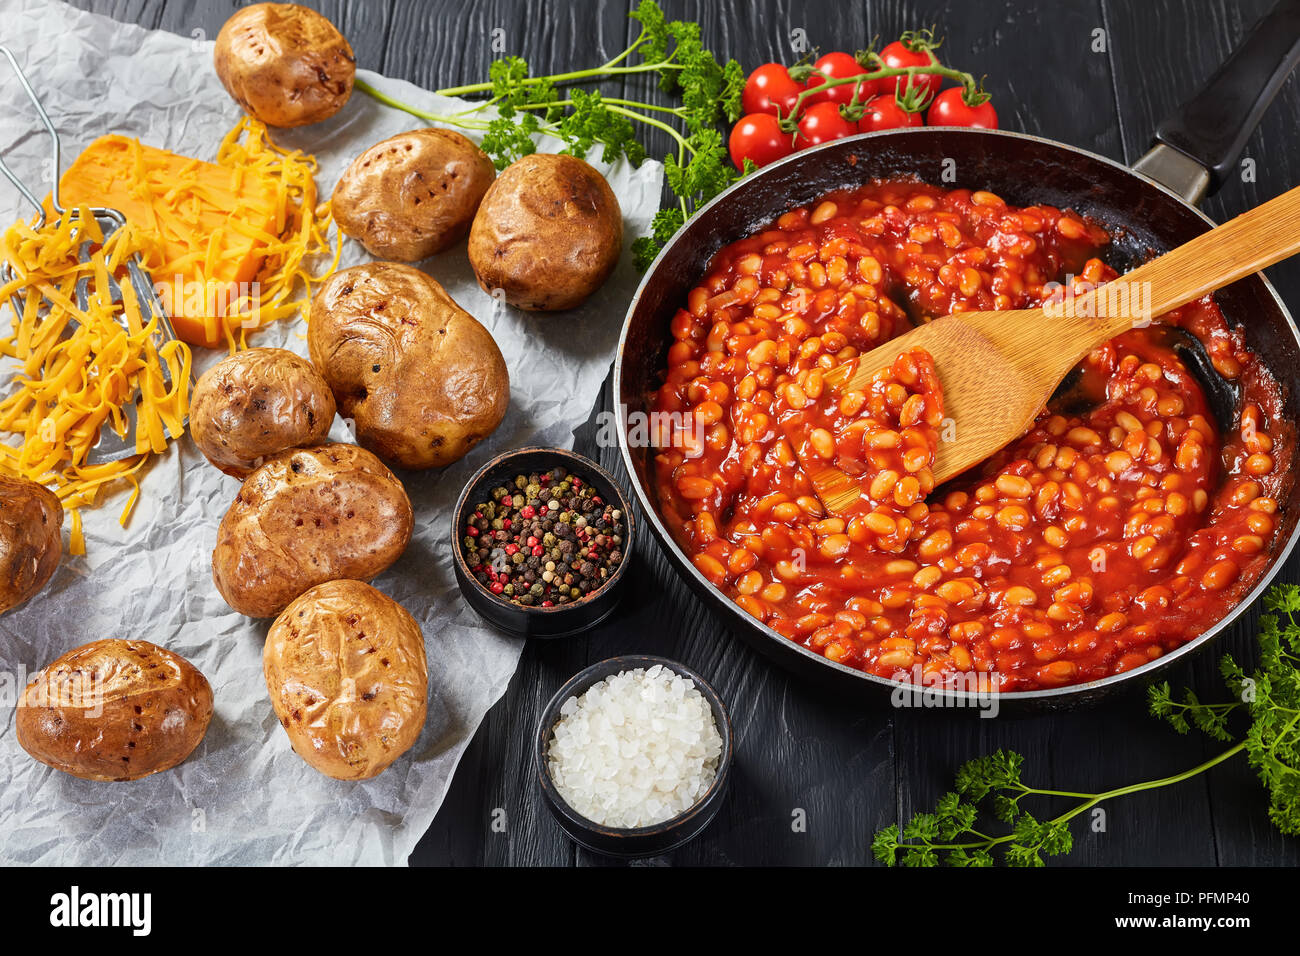 bean with tomato sauce in a skillet. baked potato or jacket potatoes with golden brown crispy skin on a paper with cheddar cheese at background, horiz Stock Photo